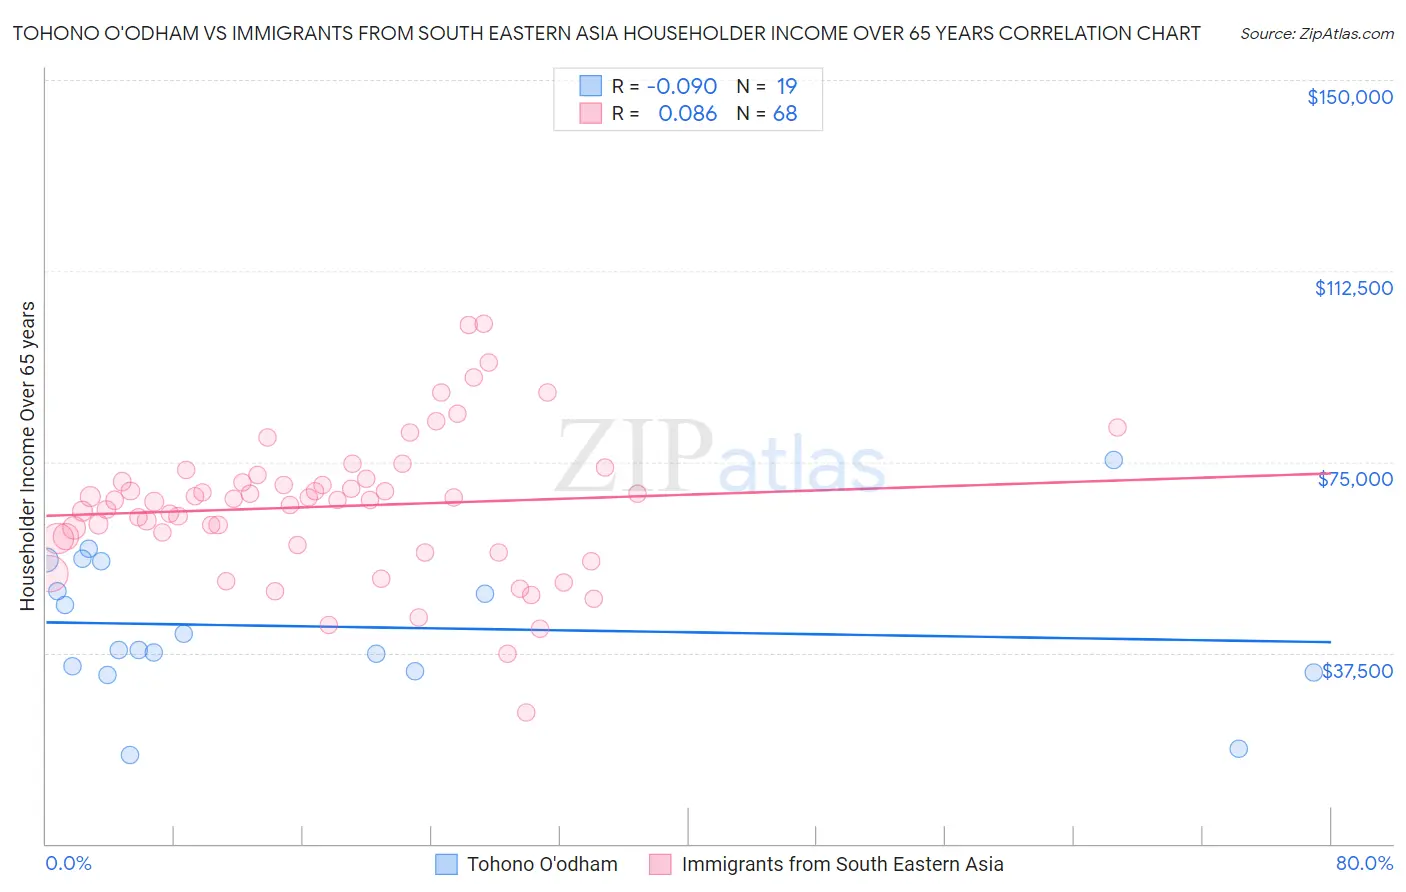 Tohono O'odham vs Immigrants from South Eastern Asia Householder Income Over 65 years